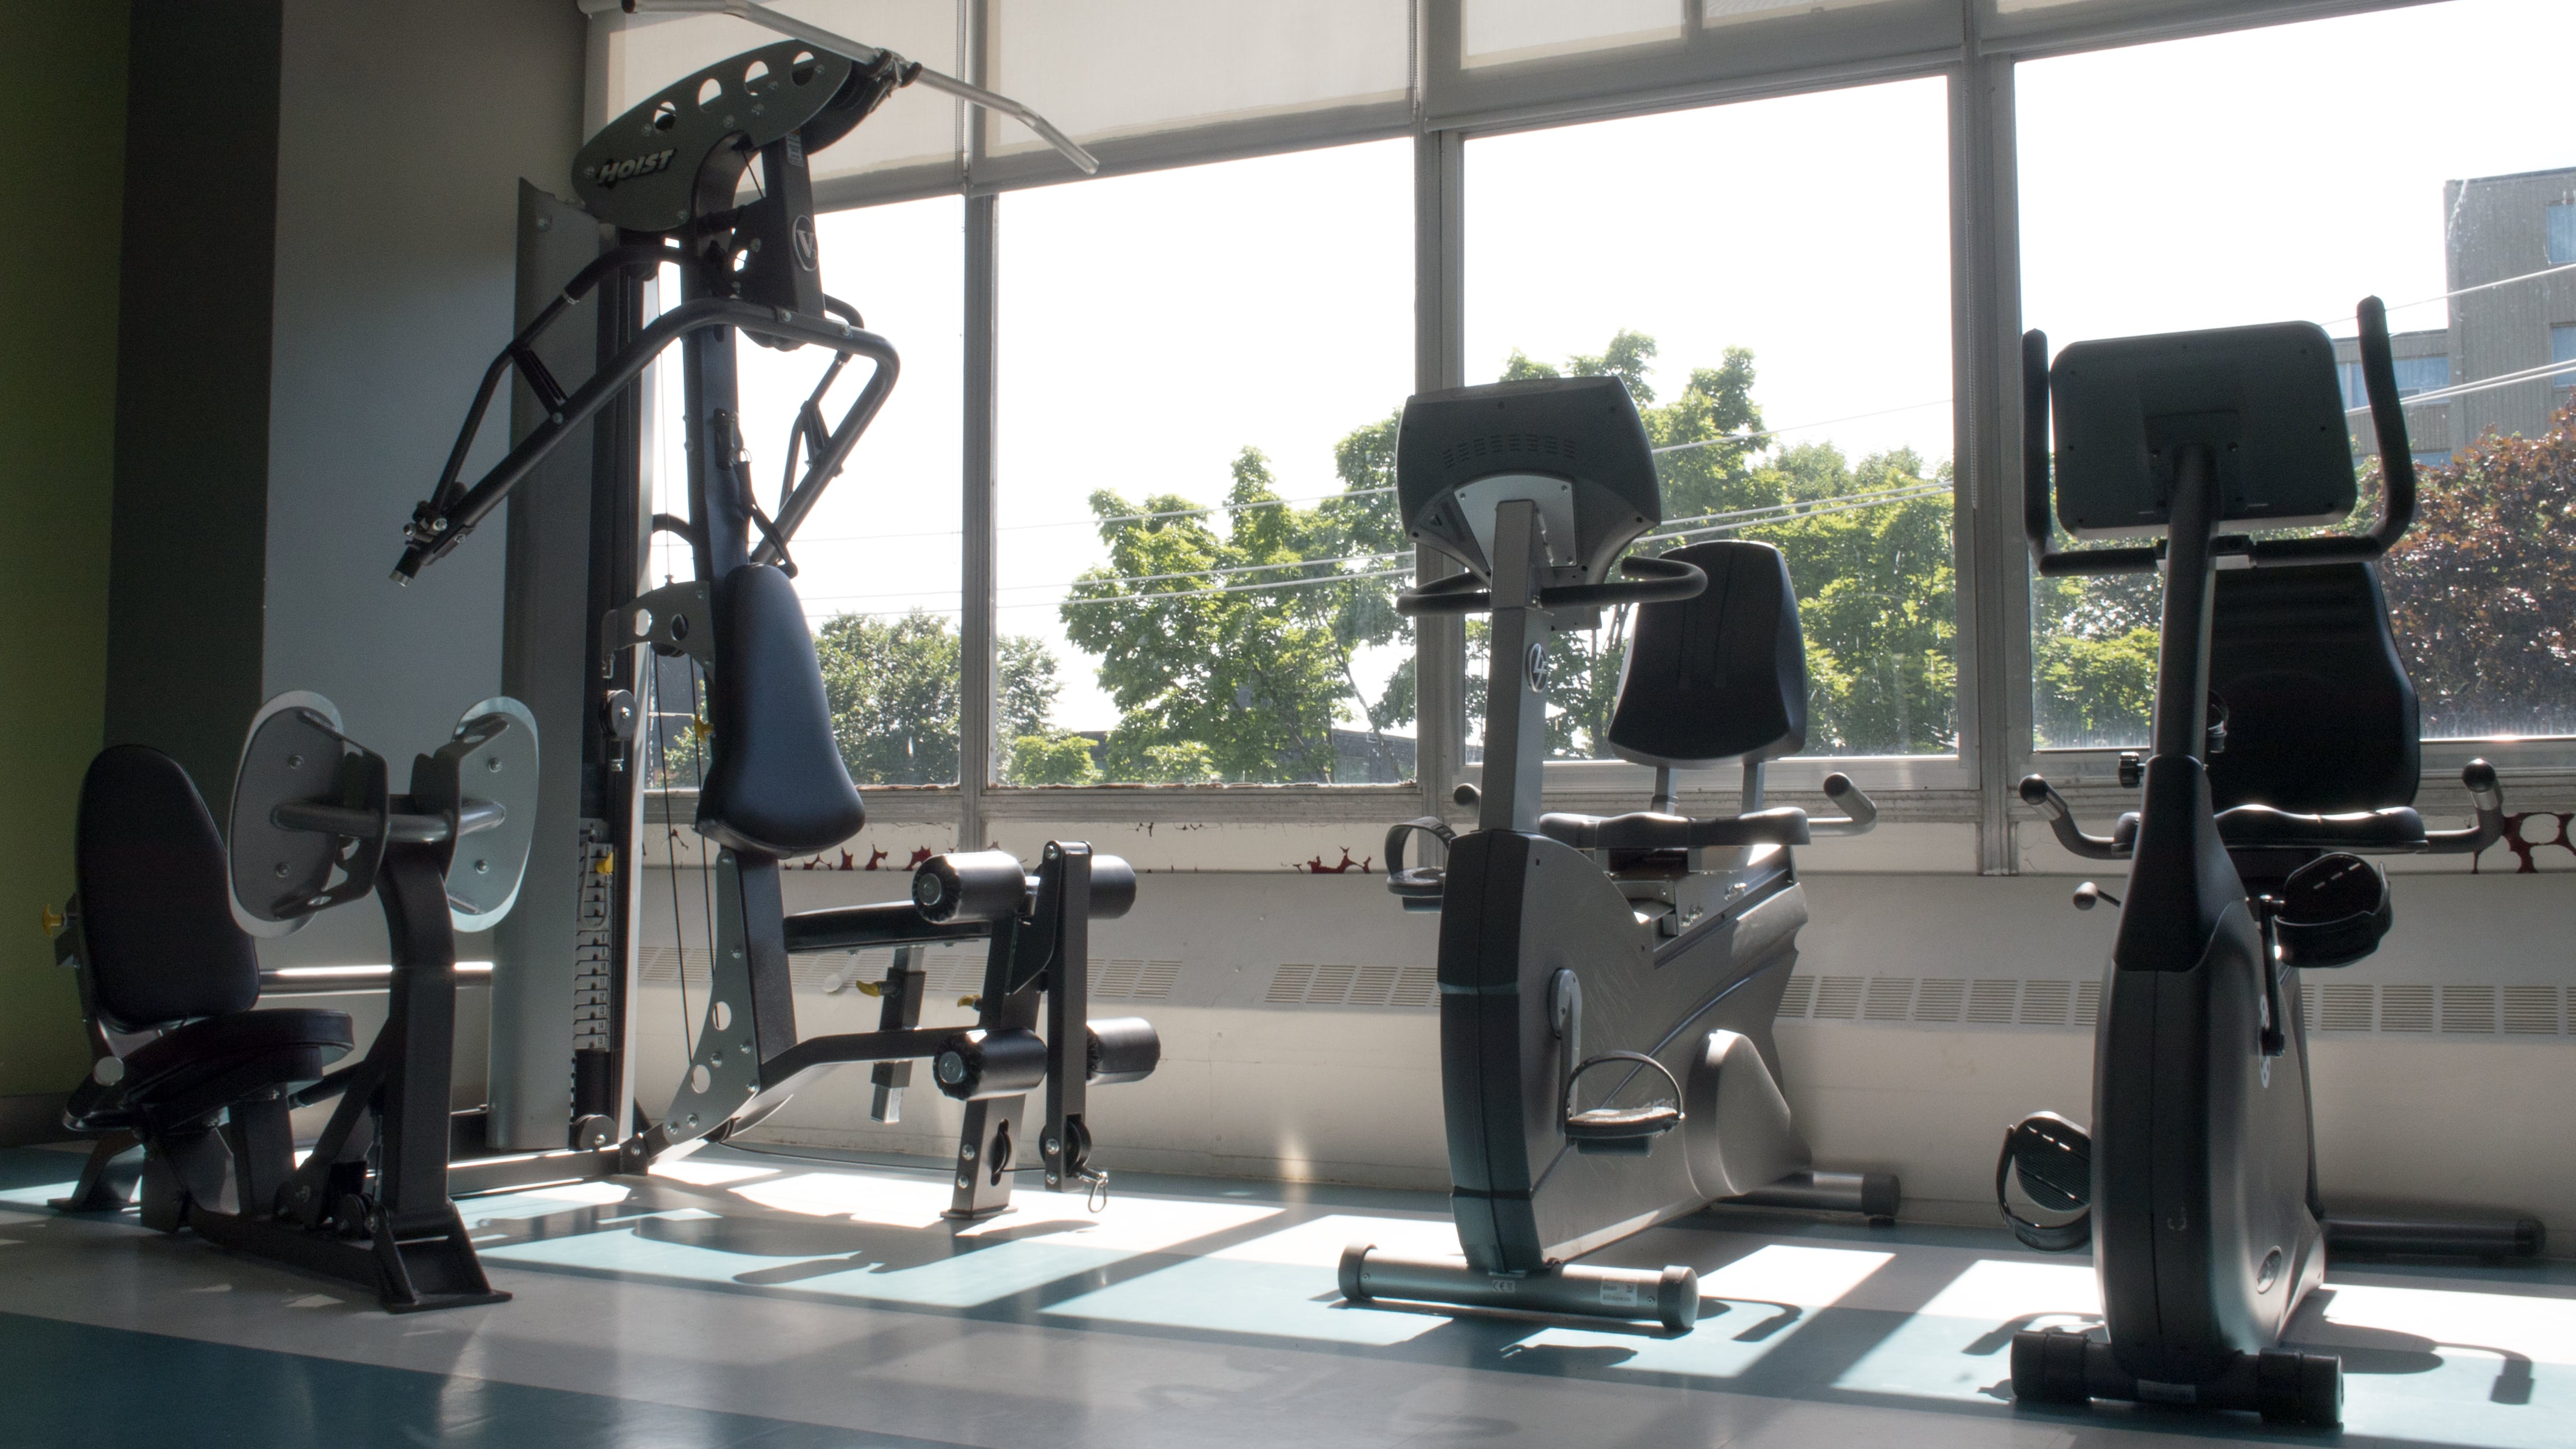 A row of equipment in the workout gym